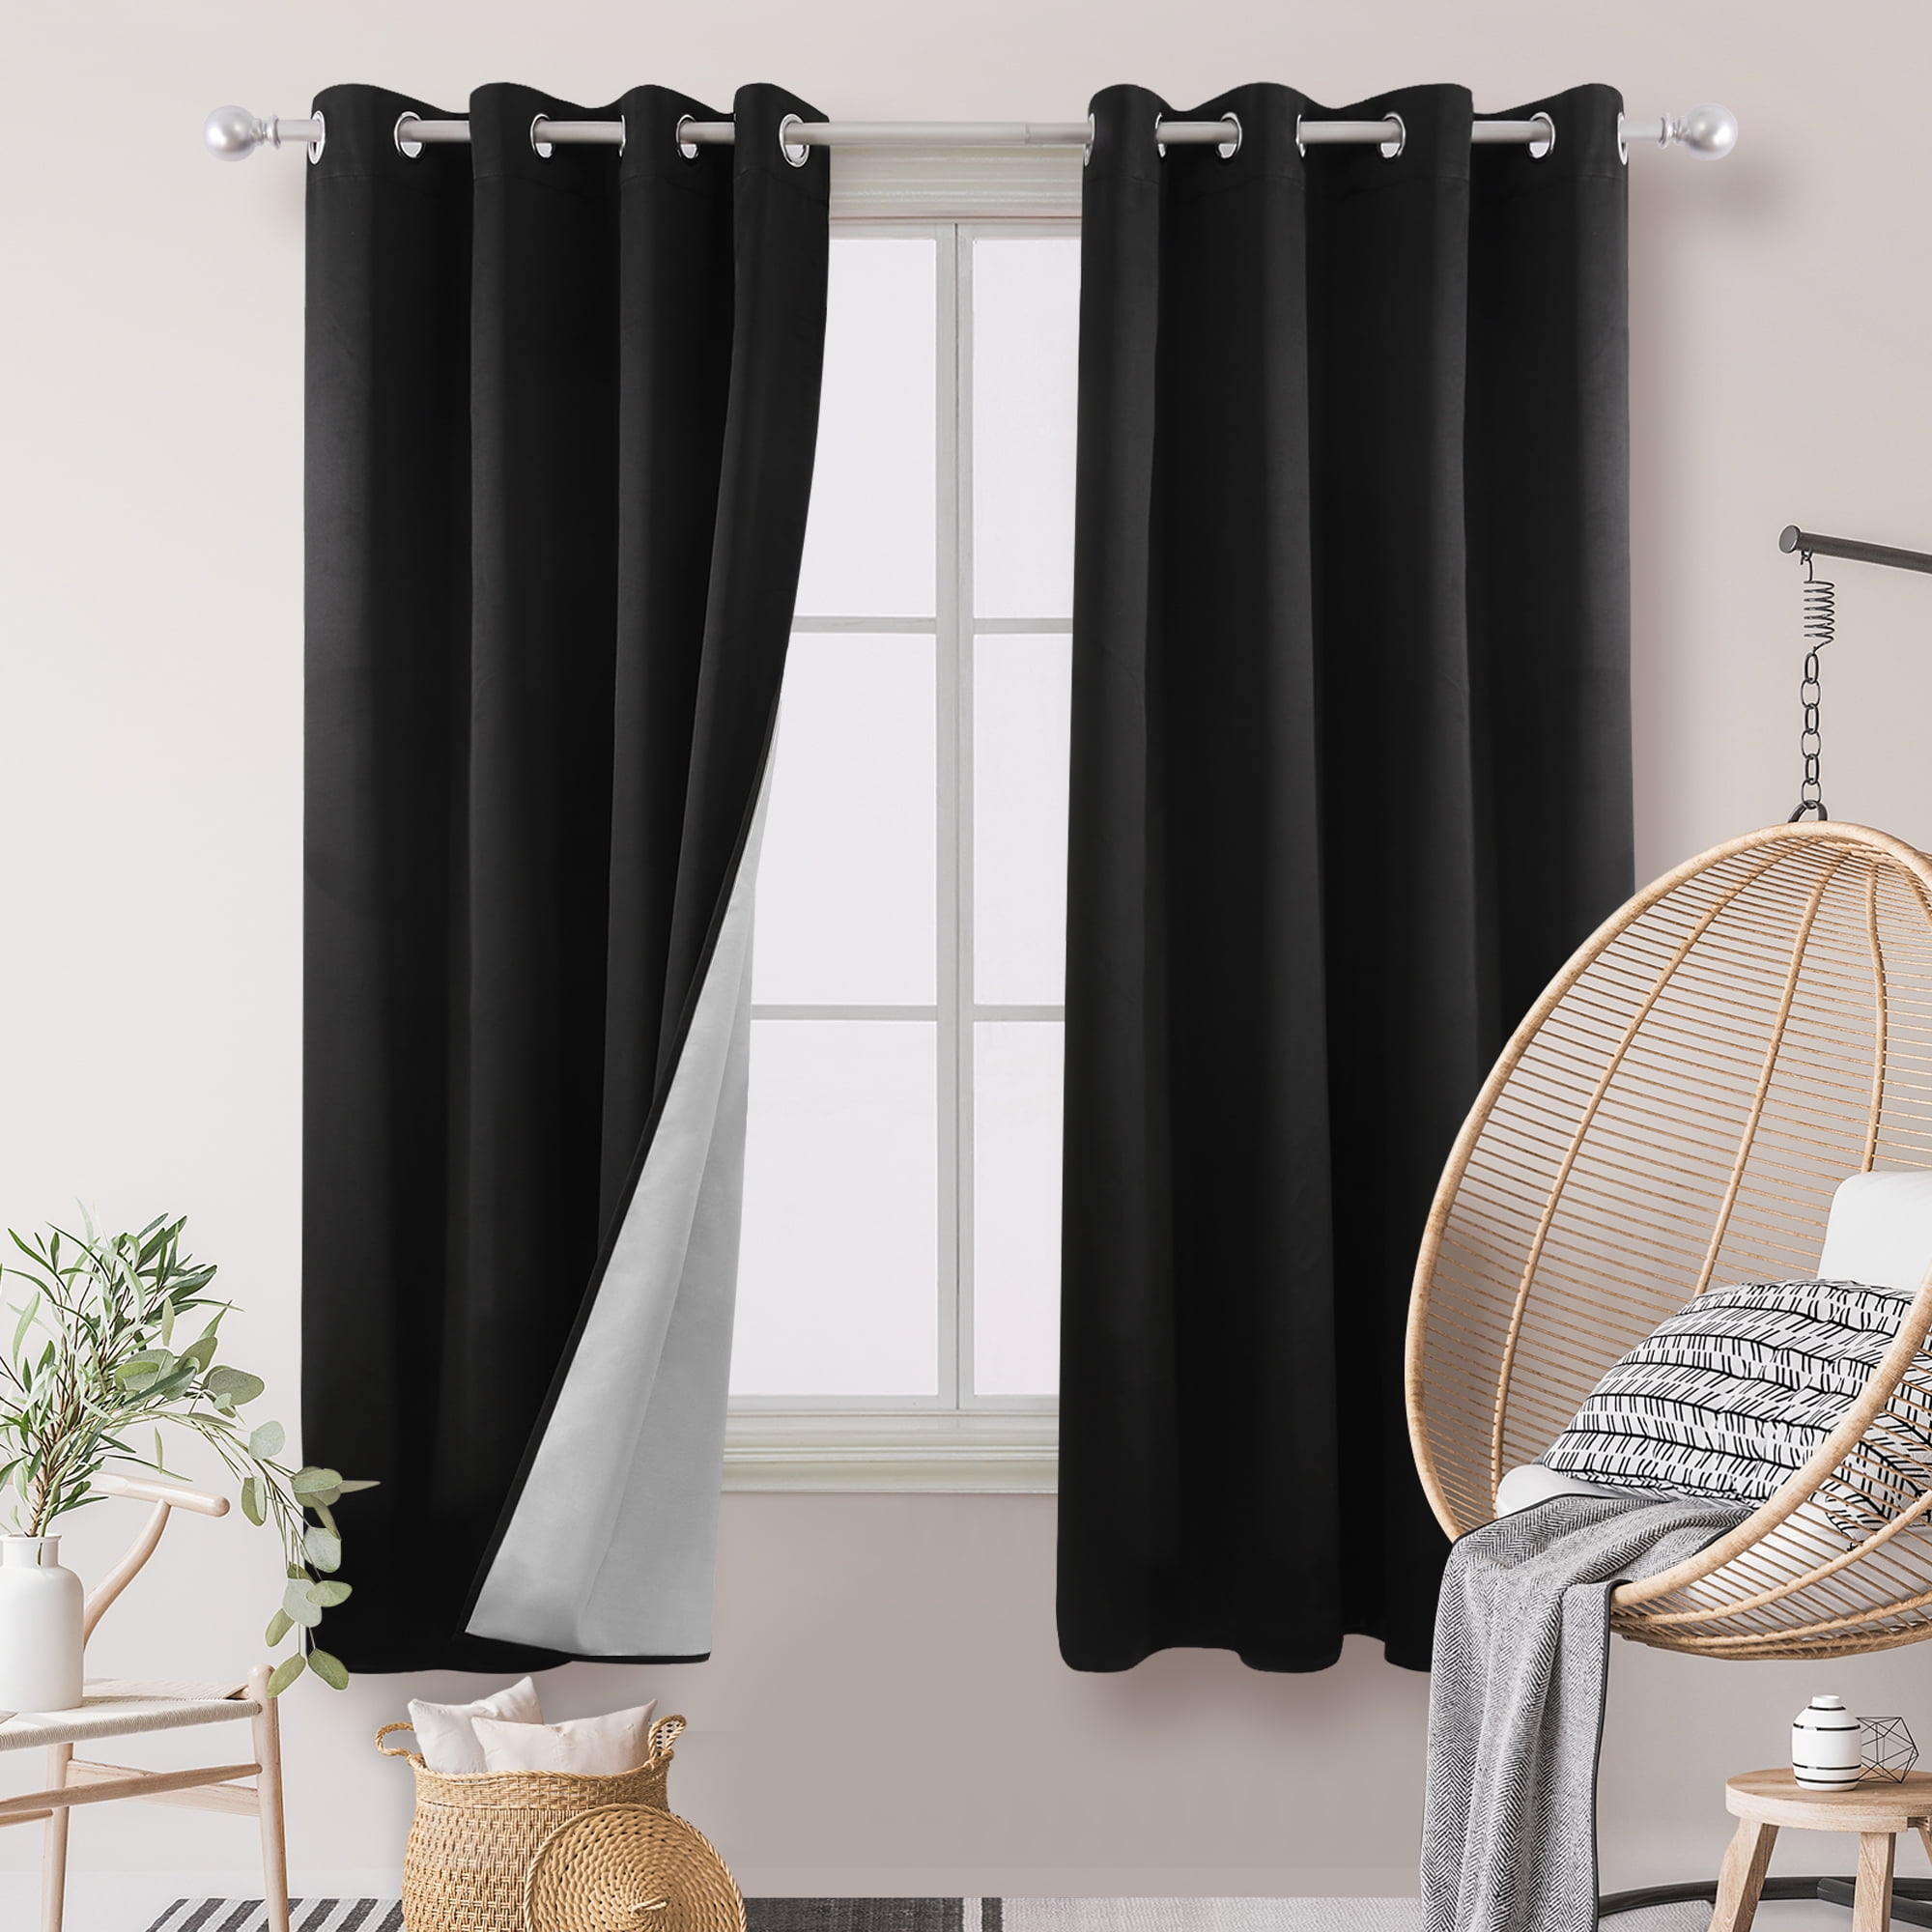 42W x 84L White 2 Panels Blackout Curtains Grommet Thermal Insulated Room Darken 